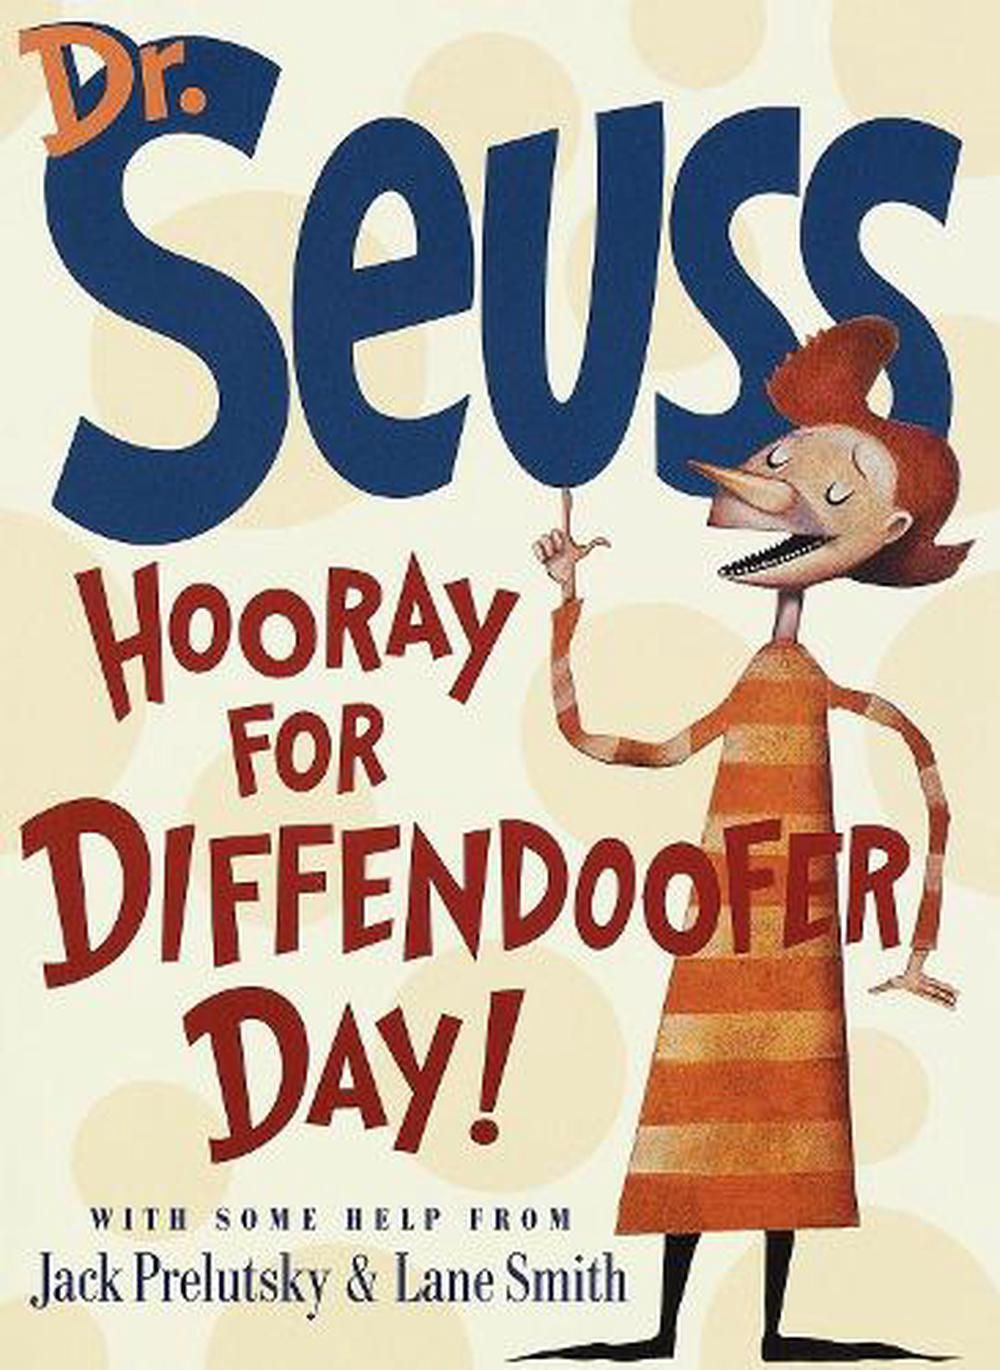 hooray-for-diffendoofer-day-by-dr-seuss-english-hardcover-book-free